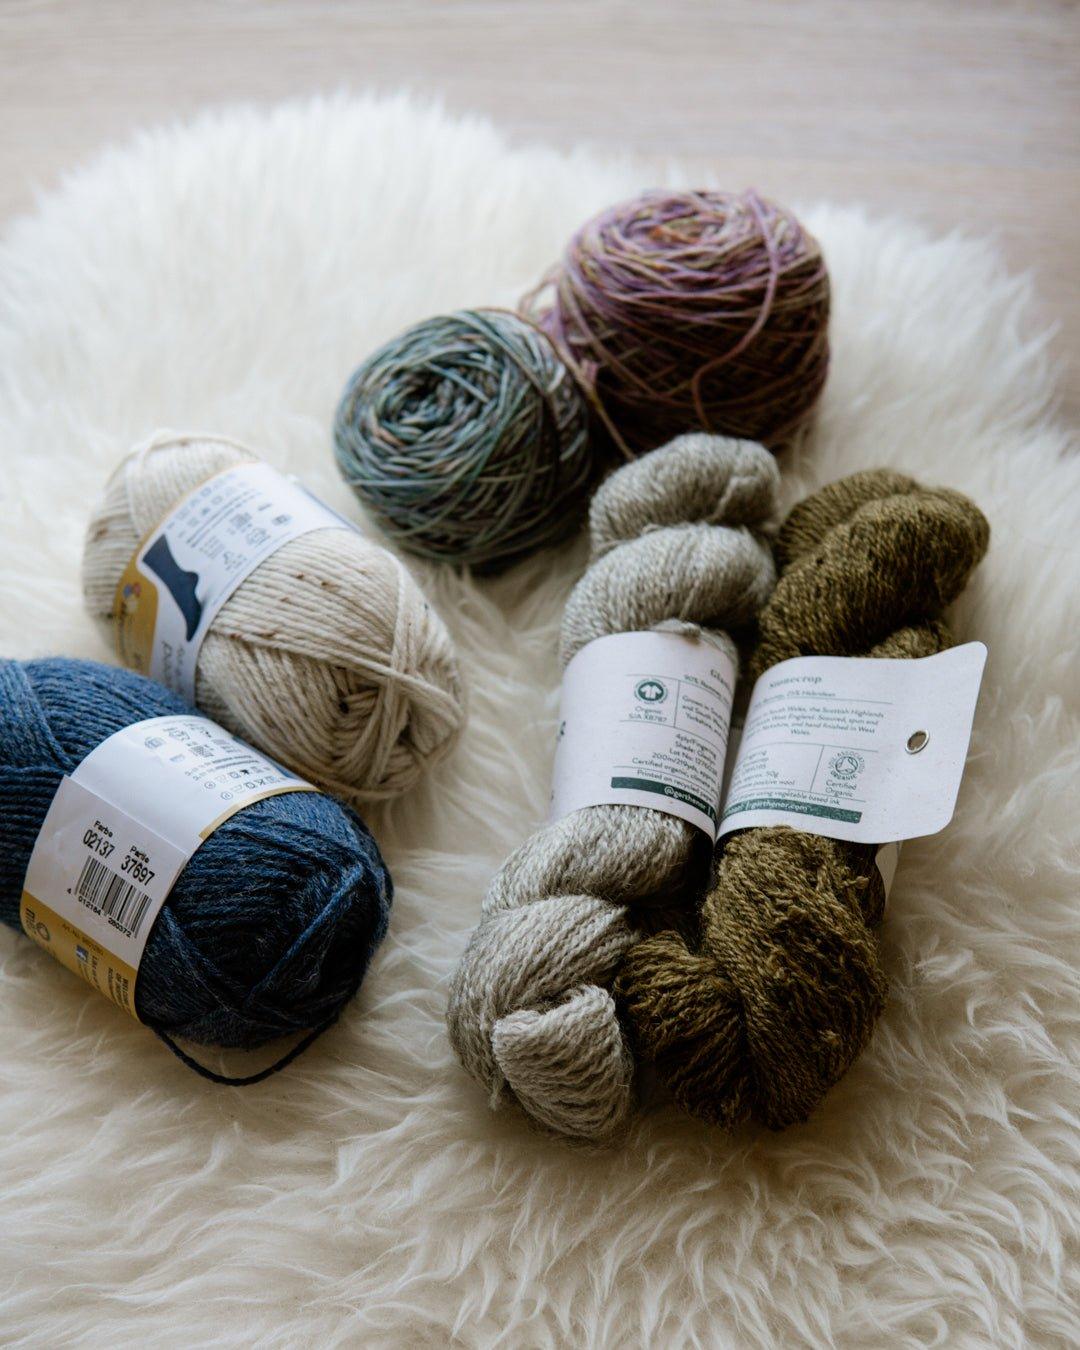 Making better sock choices: How I think about yarn. - Aimee Sher Makes